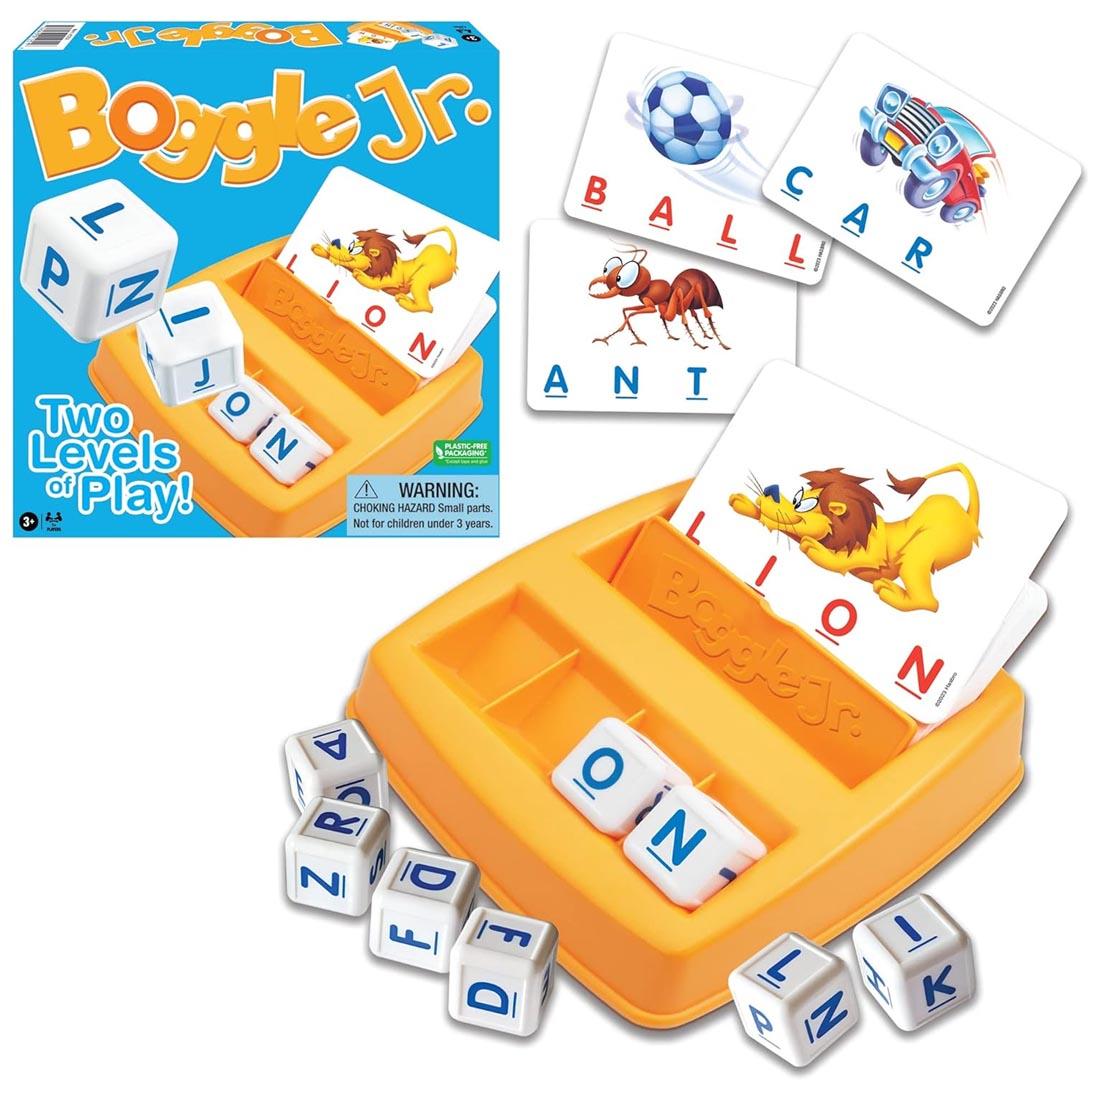 Boggle Jr. Game, with cardholder, several letter cubes and sample cards shown outside the box